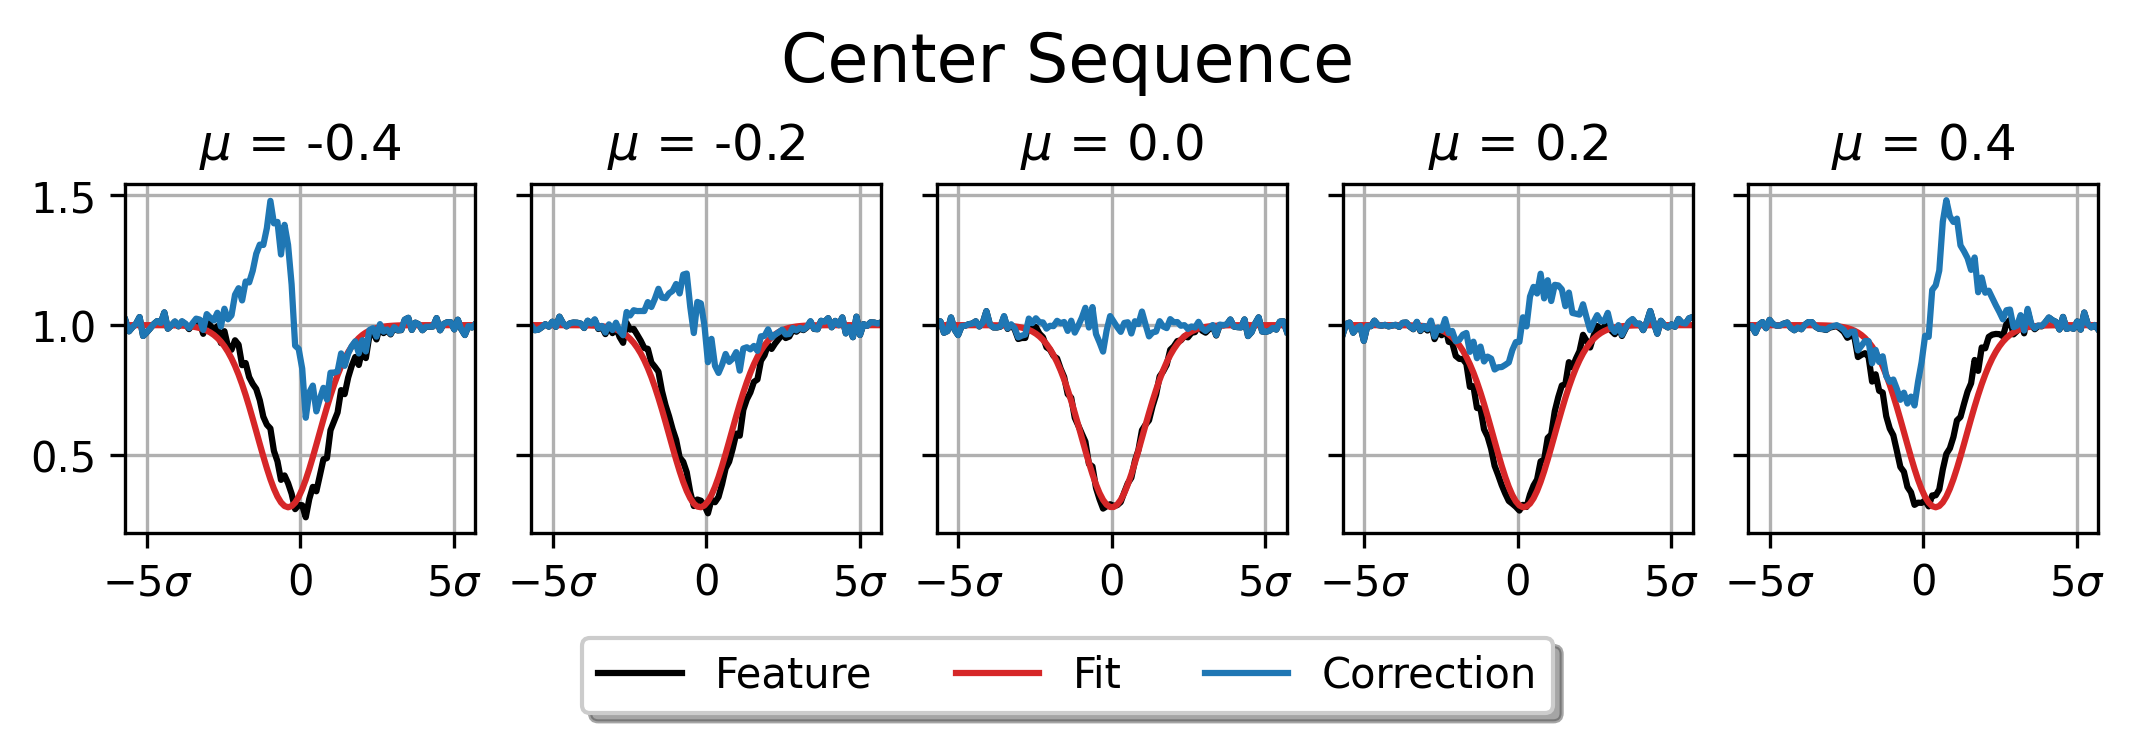 Center Sequence